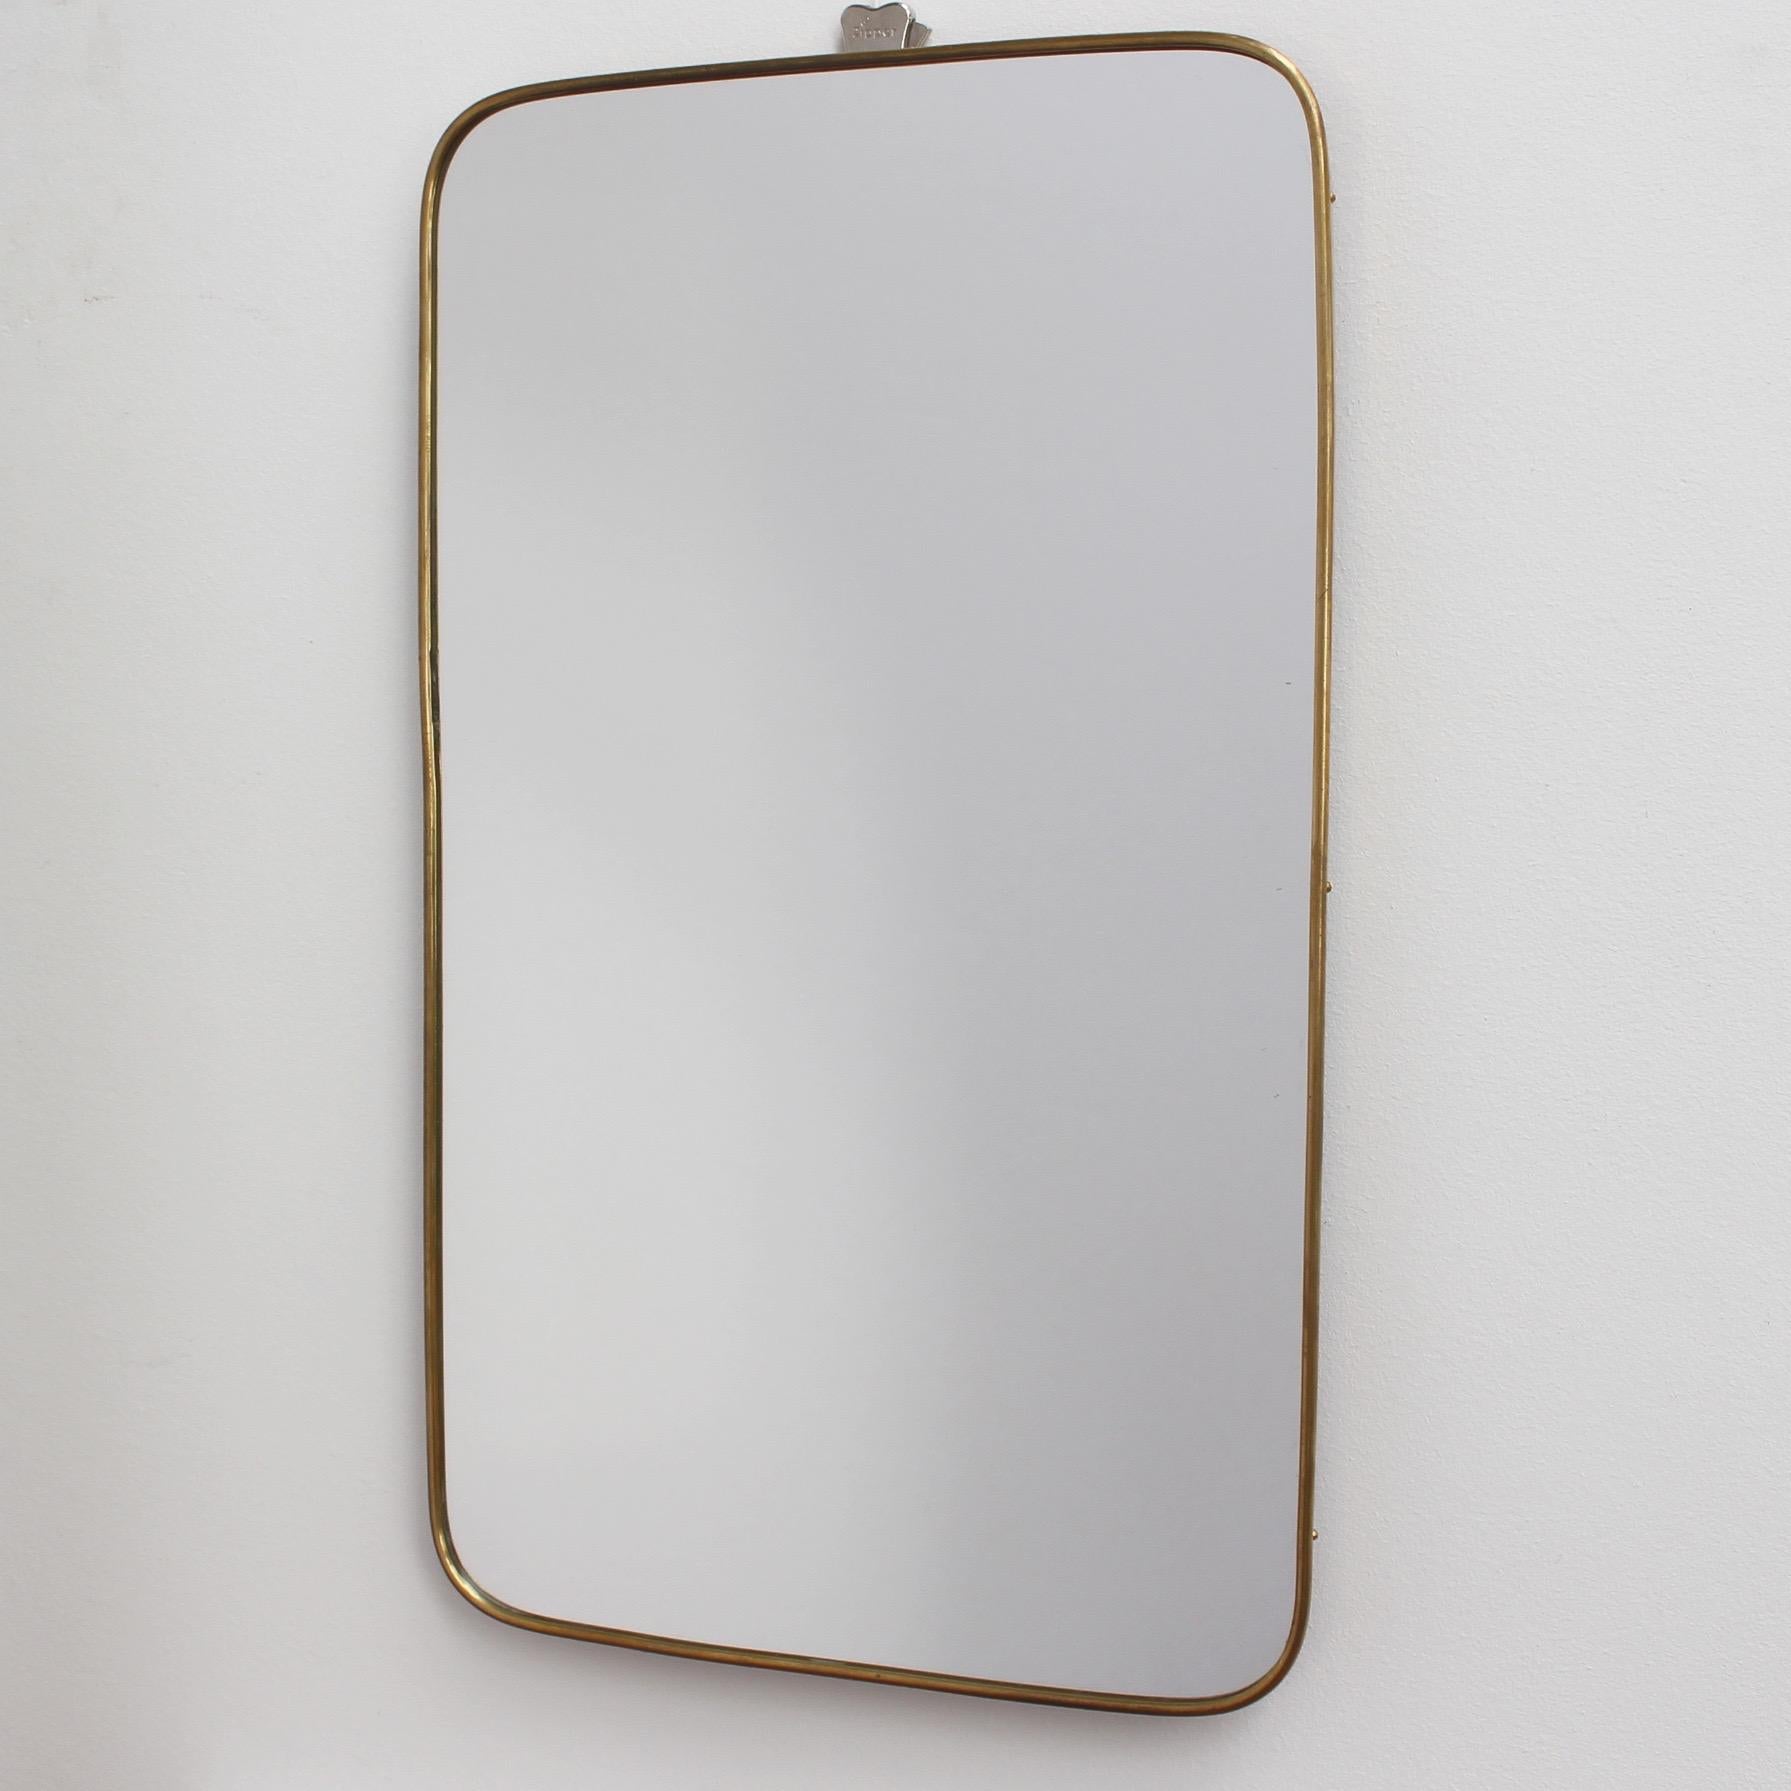 Small-scale midcentury Italian wall mirror with brass frame (circa 1950s). The mirror is rectangular with curved edges and has fittings installed to allow both vertical and horizontal hanging. It is classically elegant and distinctive in a modern